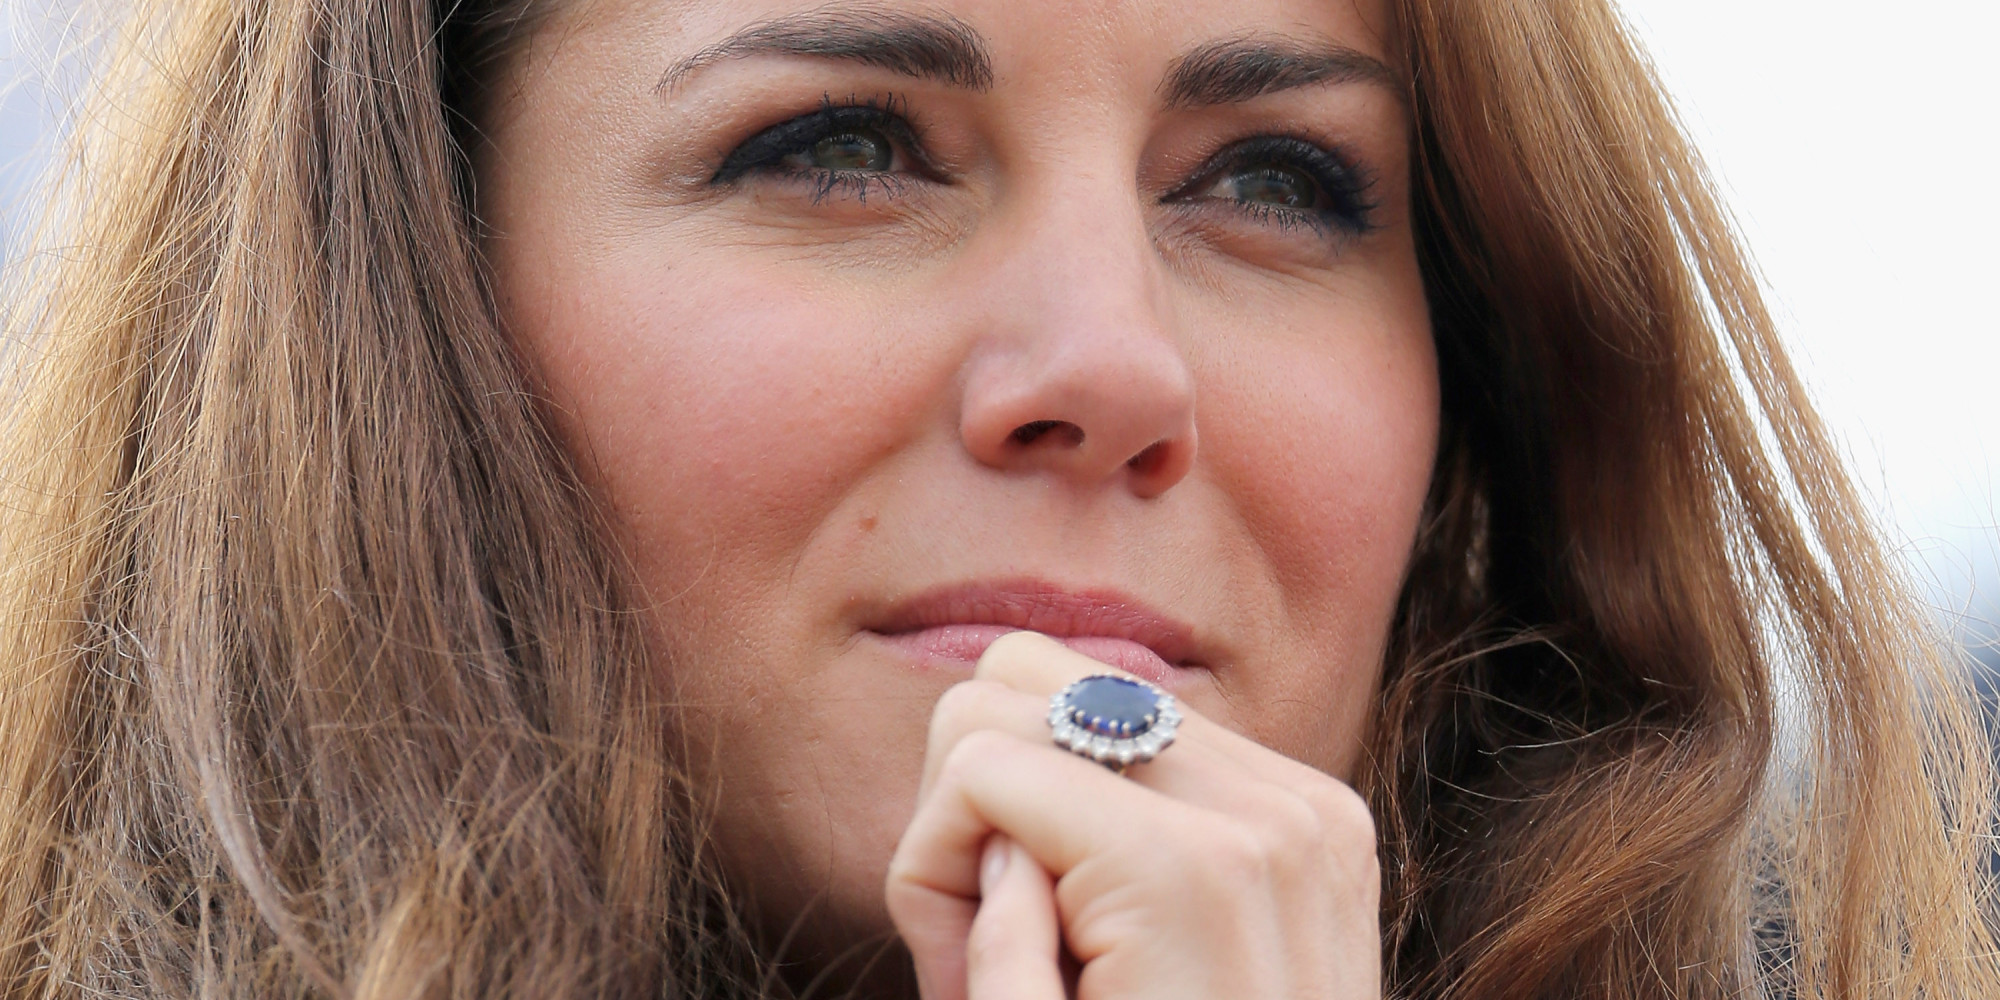 WINDSOR, ENGLAND - SEPTEMBER 02:  Catherine, Duchess of Cambridge watches Great Britain Mixed Coxed Four Rowing - LTAMix4+ team celebrate after winning gold on day 4 of the London 2012 Paralympic Games at Eton Dorney on September 2, 2012 in Windsor, England.  (Photo by Chris Jackson/Getty Images)